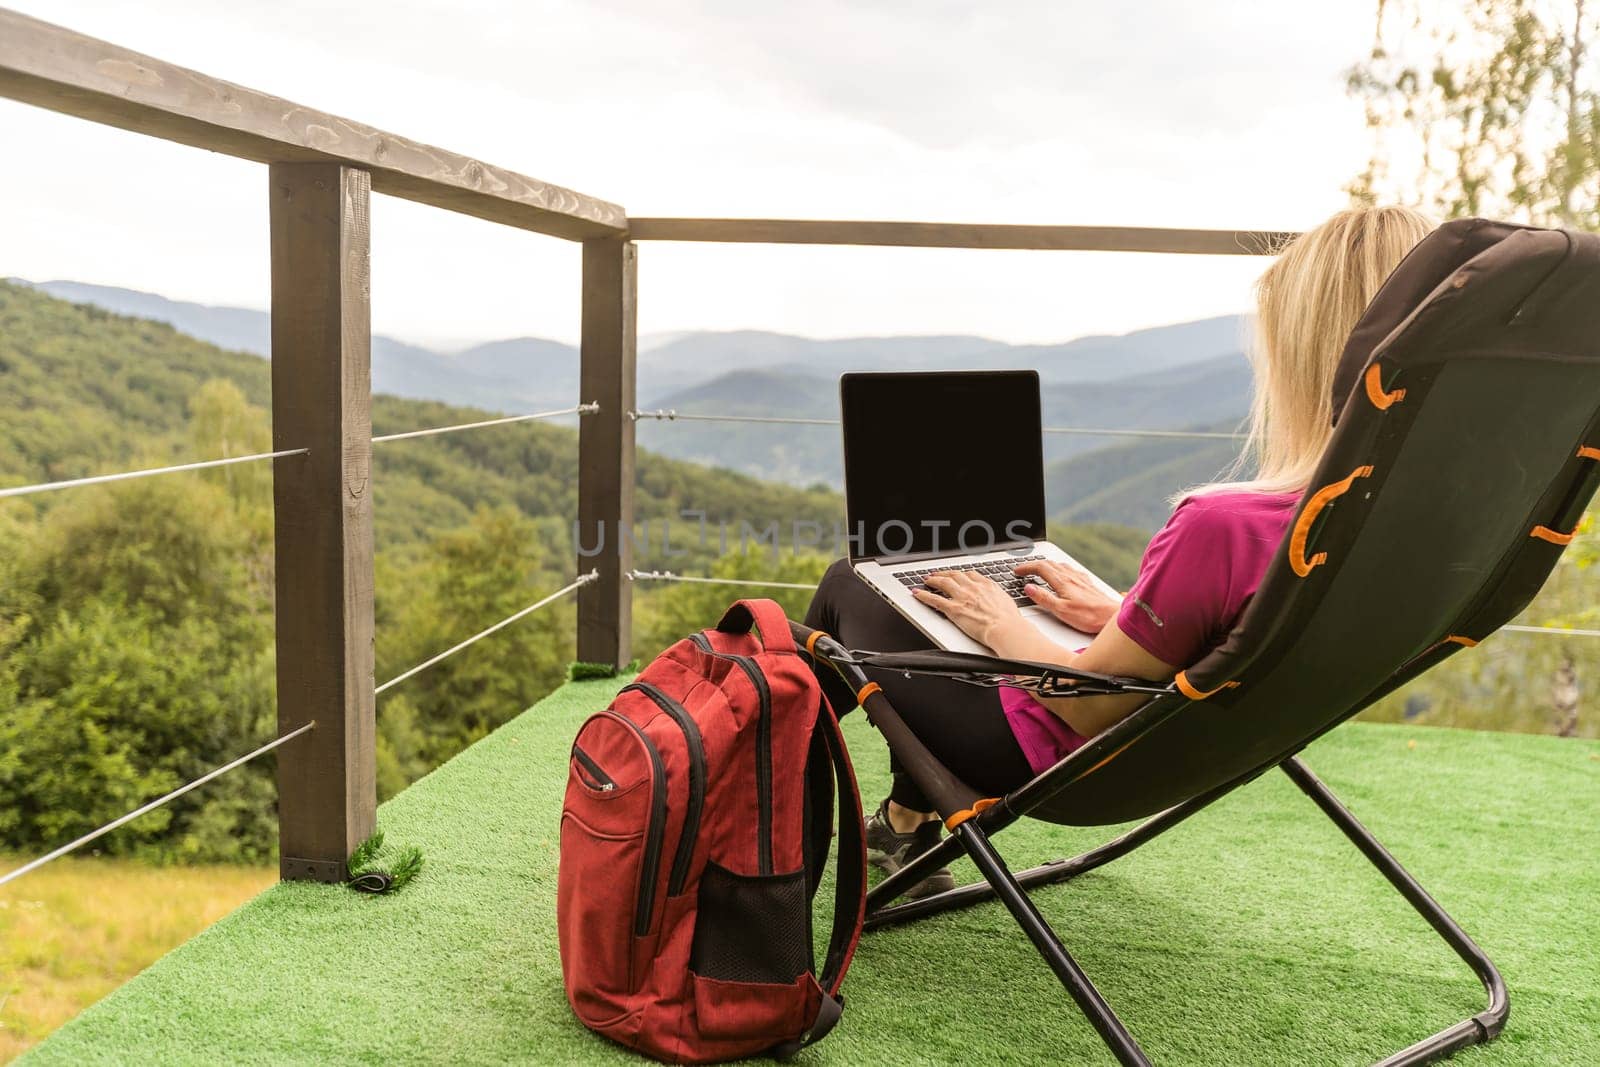 A woman in a sports warm suit works on a laptop outdoors in a mountainous area